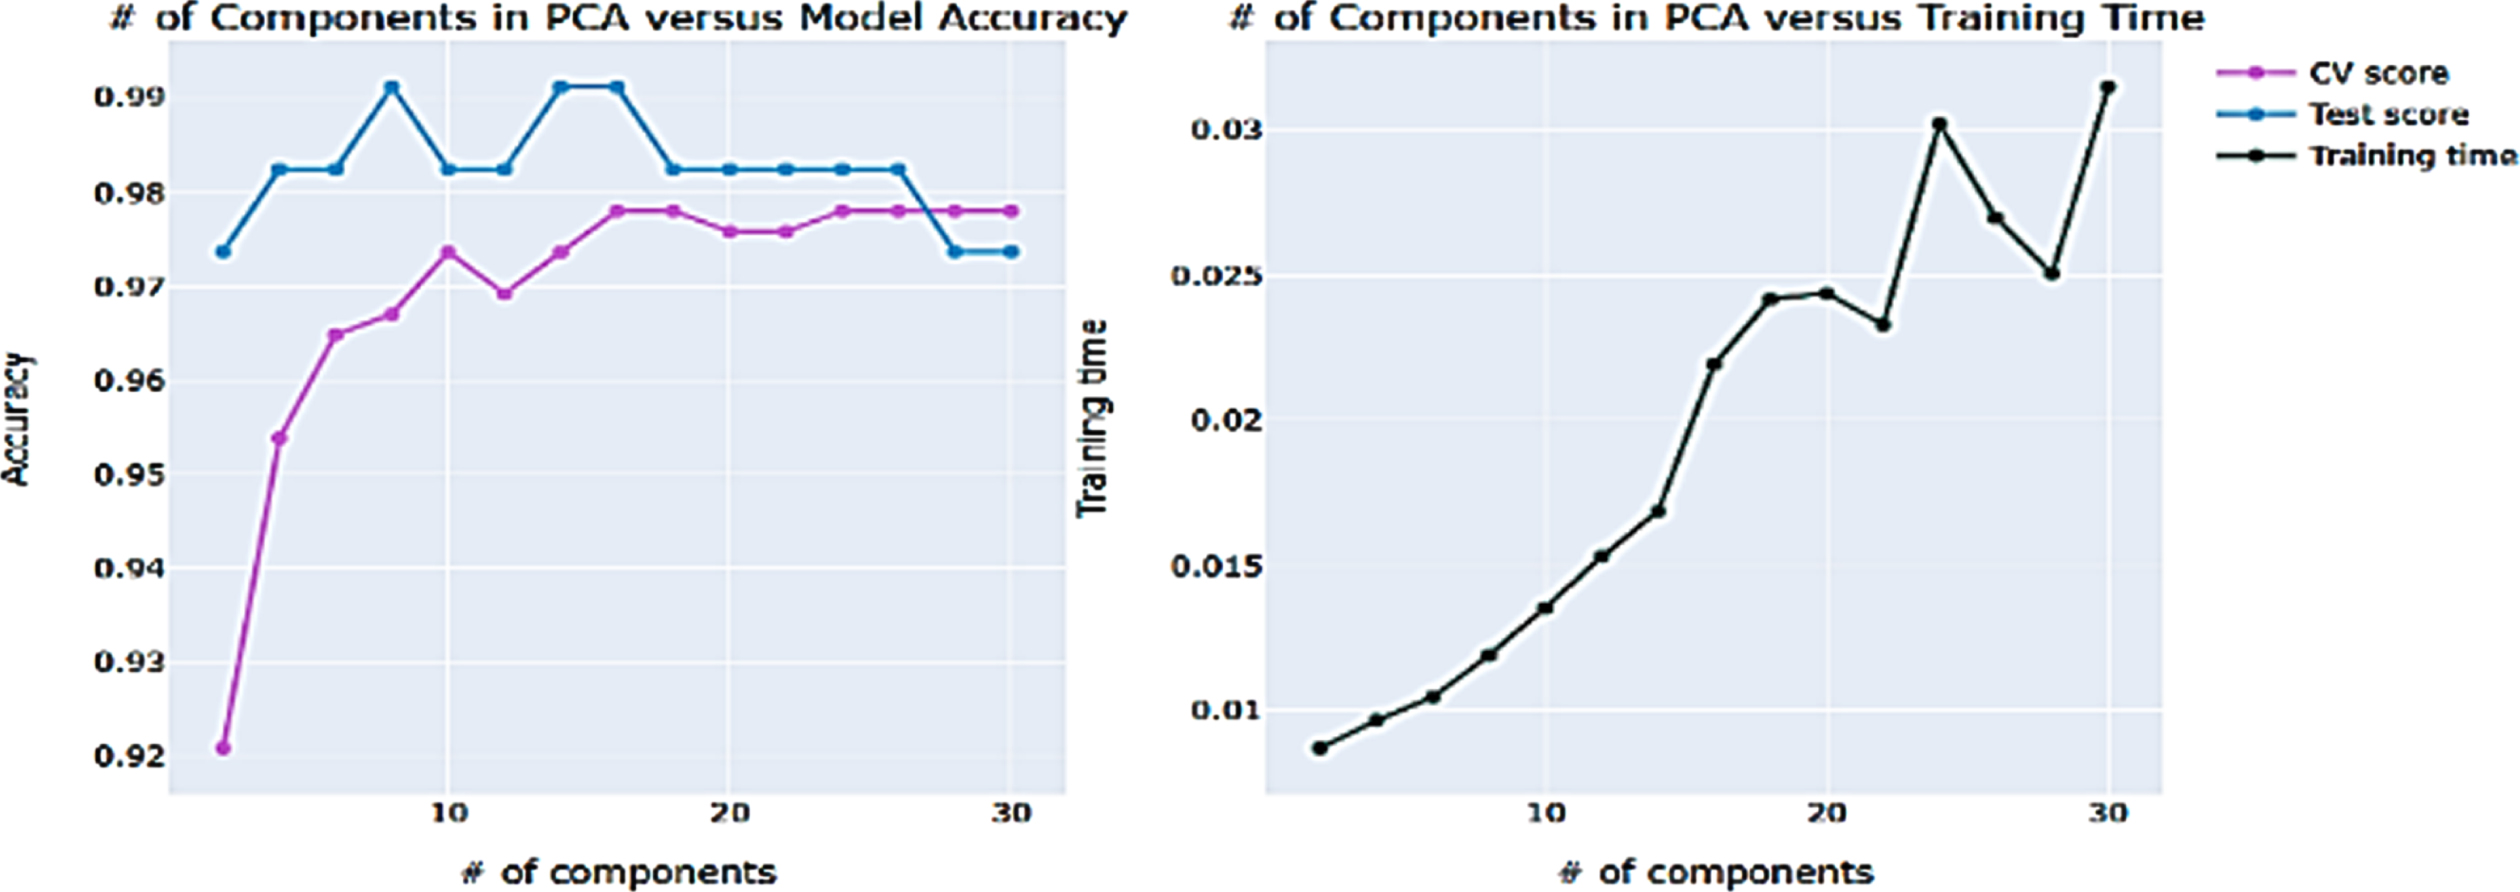 Depicting the ROC curve between the numbers of components in PCA versus model accuracy/training time to find the best hyperparameters.